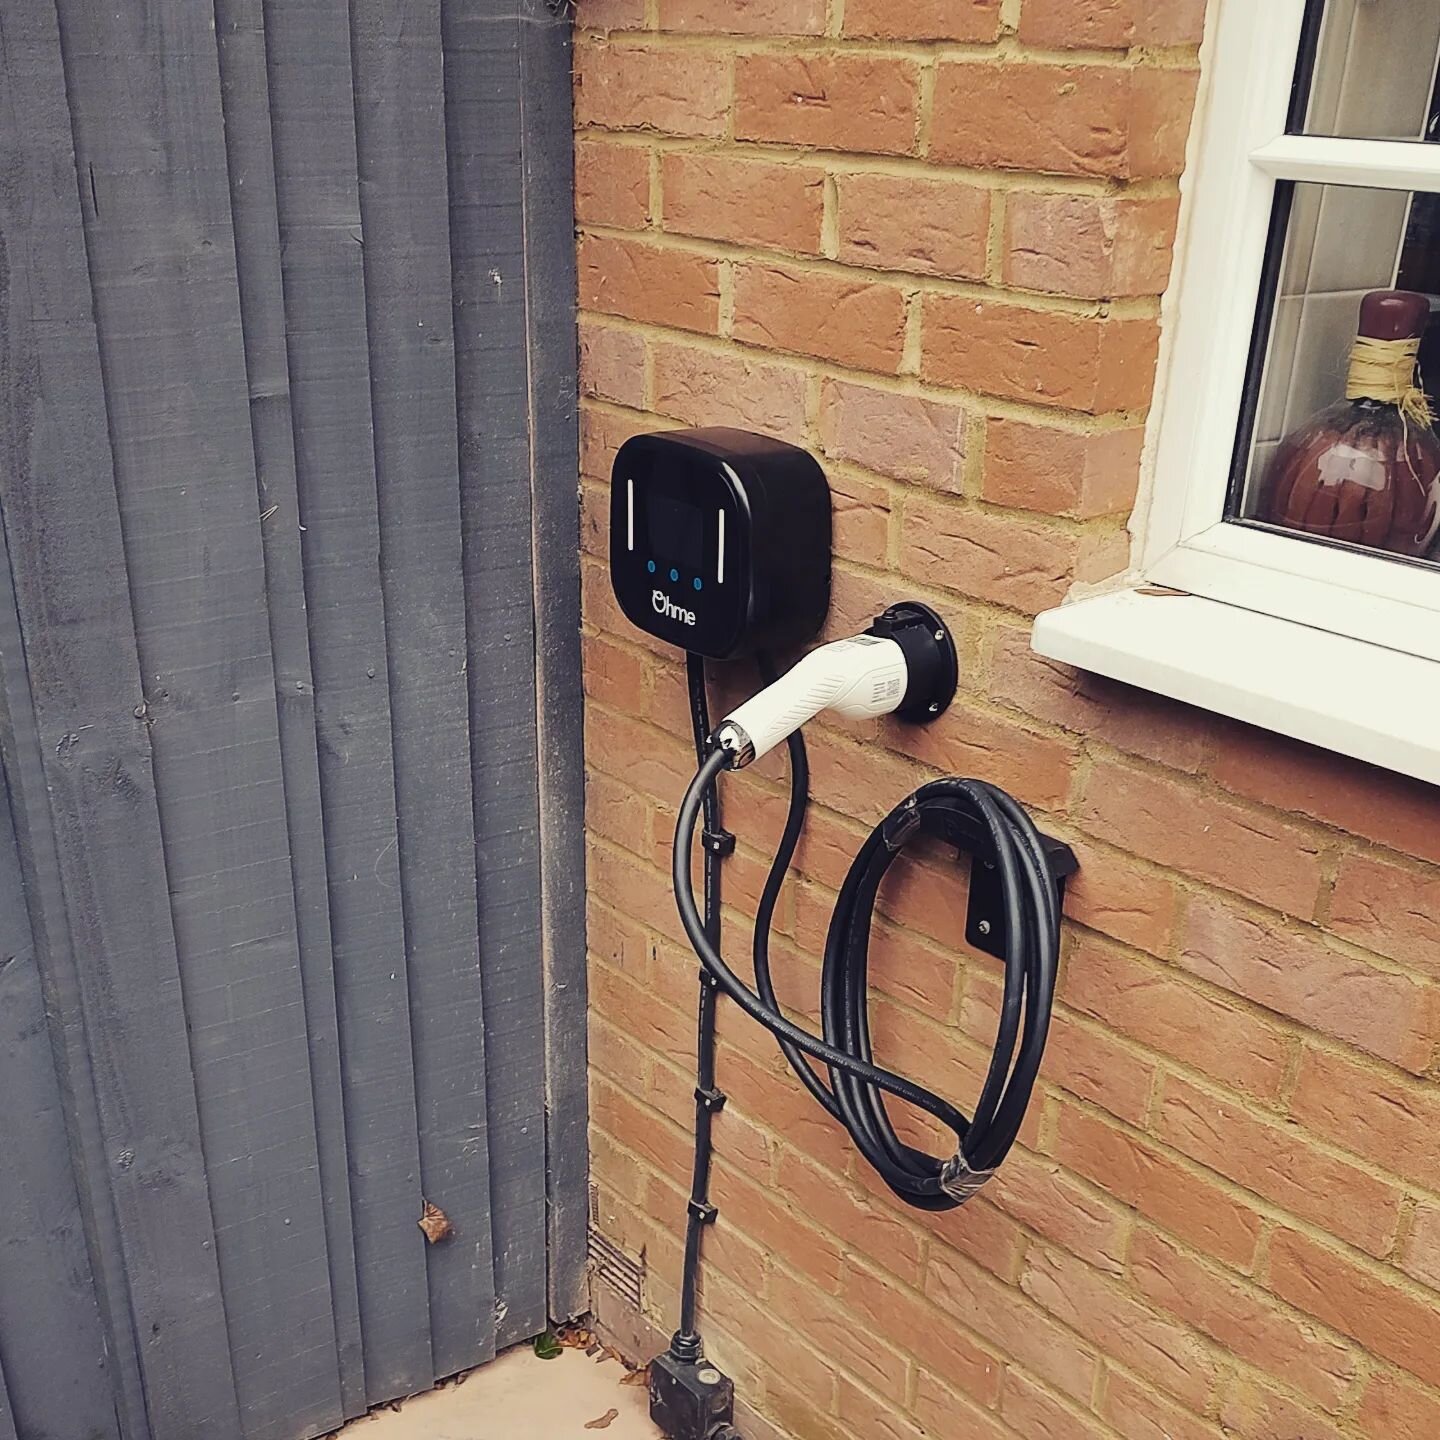 Today's @ohmeev installation, great unit to install and a few more of these coming up in the next couple of weeks. Happy Friday. #ohme #ohmehomepro #ev #evchargermidlands #evchargernorthampton #evmiltonkeynes #evchargerbedford #electricvehiclenortham